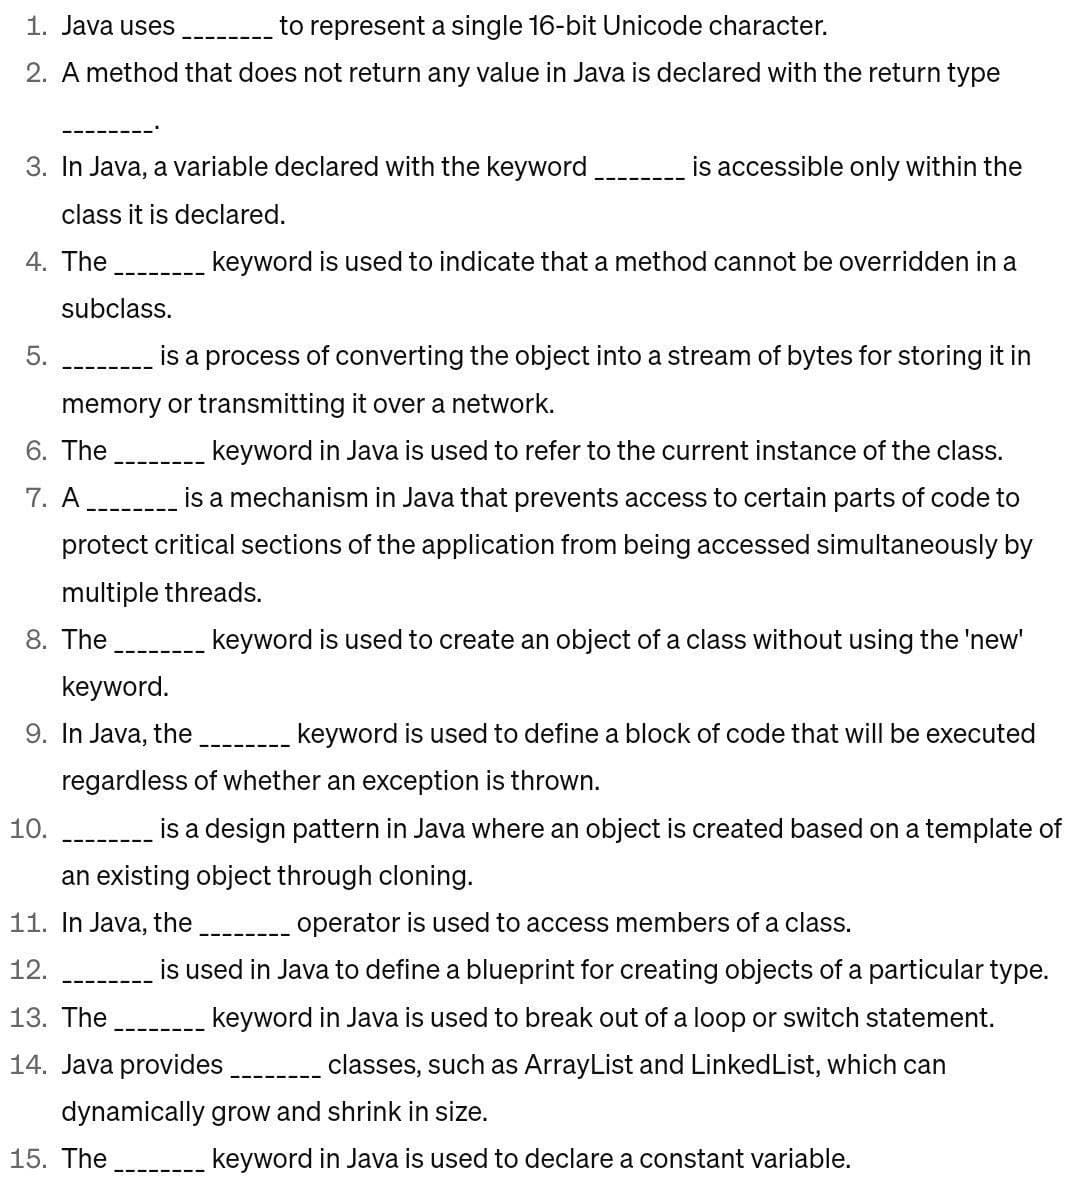 1. Java uses
to represent a single 16-bit Unicode character.
2. A method that does not return any value in Java is declared with the return type
3. In Java, a variable declared with the keyword
class it is declared.
4. The
5.
subclass.
is a process of converting the object into a stream of bytes for storing it in
memory or transmitting it over a network.
6. The
keyword in Java is used to refer to the current instance of the class.
7. A
is a mechanism in Java that prevents access to certain parts of code to
protect critical sections of the application from being accessed simultaneously by
multiple threads.
8. The
keyword is used to create an object of a class without using the 'new'
keyword.
9. In Java, the
10.
is accessible only within the
keyword is used to indicate that a method cannot be overridden in a
keyword is used to define a block of code that will be executed
regardless of whether an exception is thrown.
is a design pattern in Java where an object is created based on a template of
an existing object through cloning.
11. In Java, the ________ operator is used to access members of a class.
12.
13. The
is used in Java to define a blueprint for creating objects of a particular type.
keyword in Java is used to break out of a loop or switch statement.
14. Java provides ____. classes, such as ArrayList and Linked List, which can
dynamically grow and shrink in size.
keyword in Java is used to declare a constant variable.
15. The